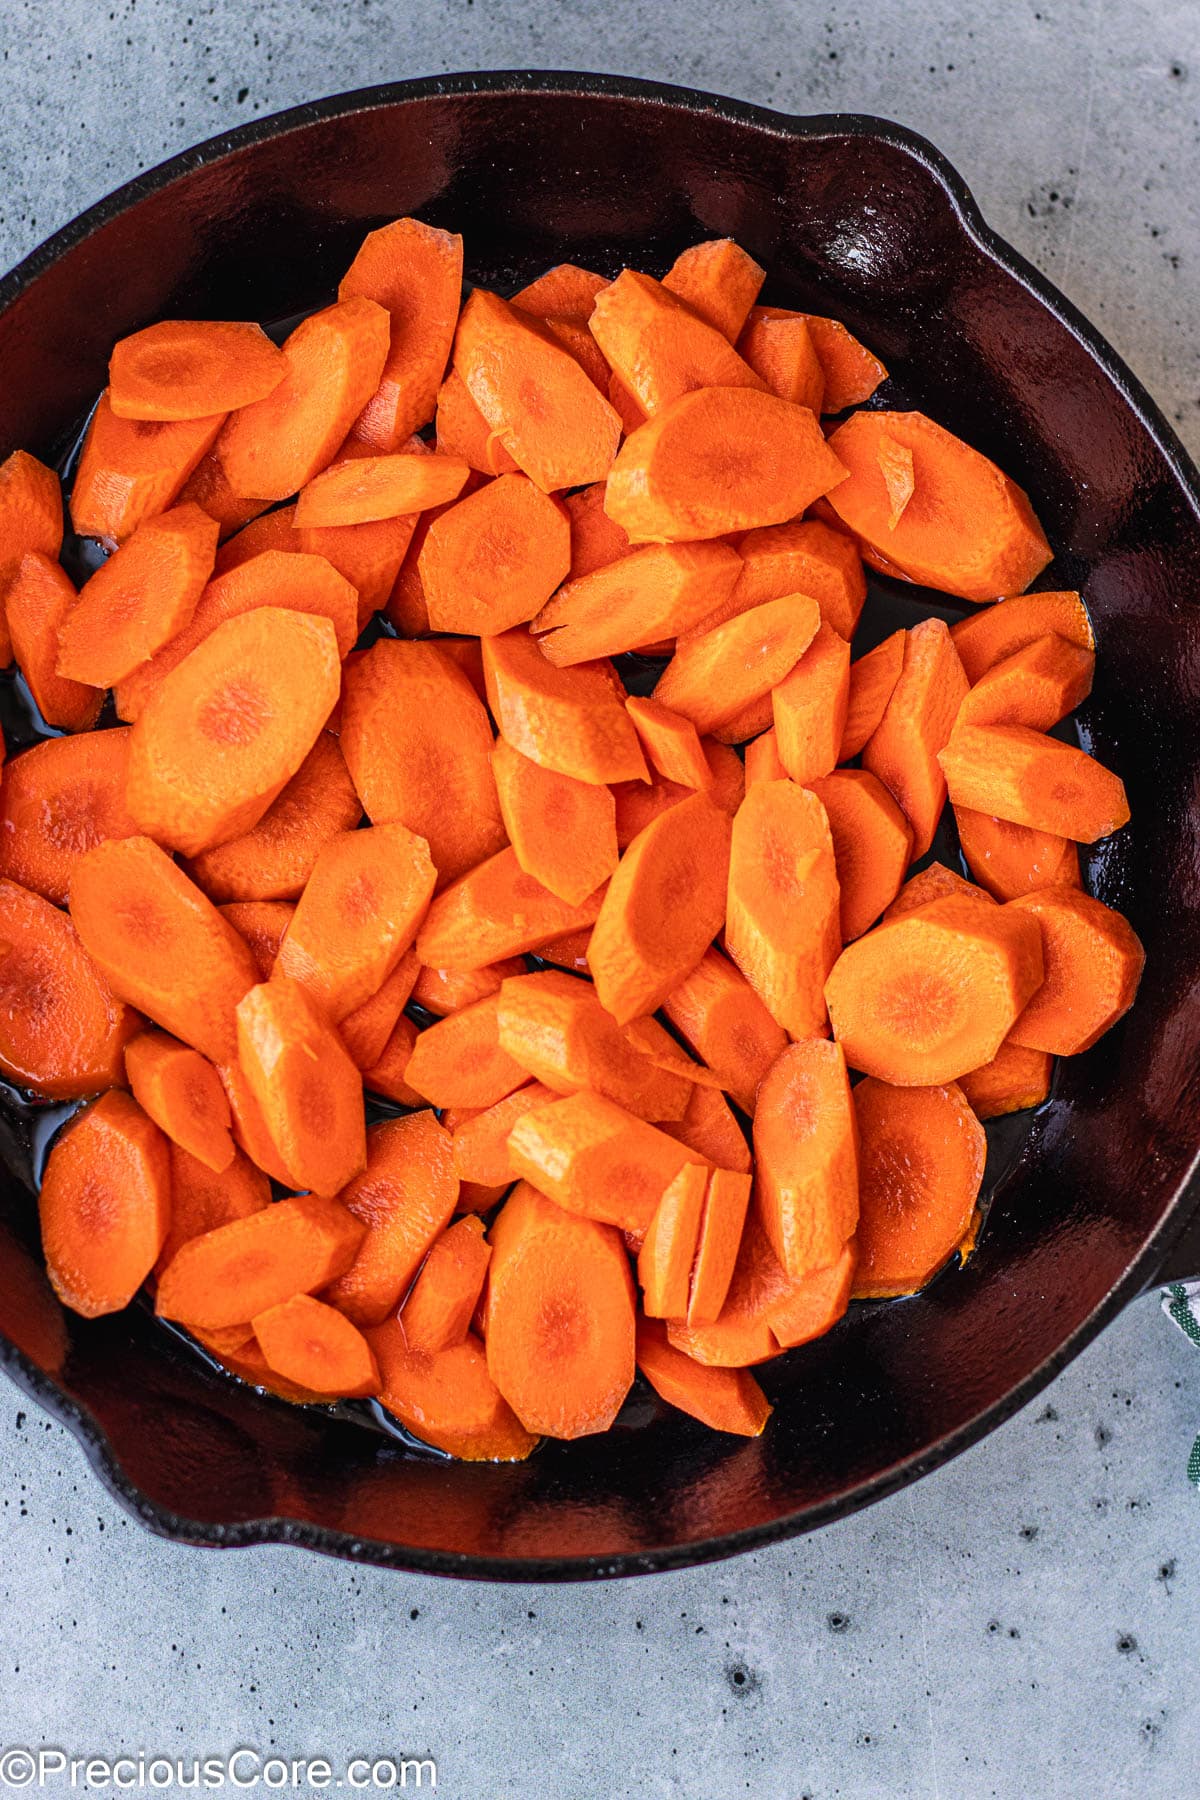 Carrot slices in a cast iron skillet.